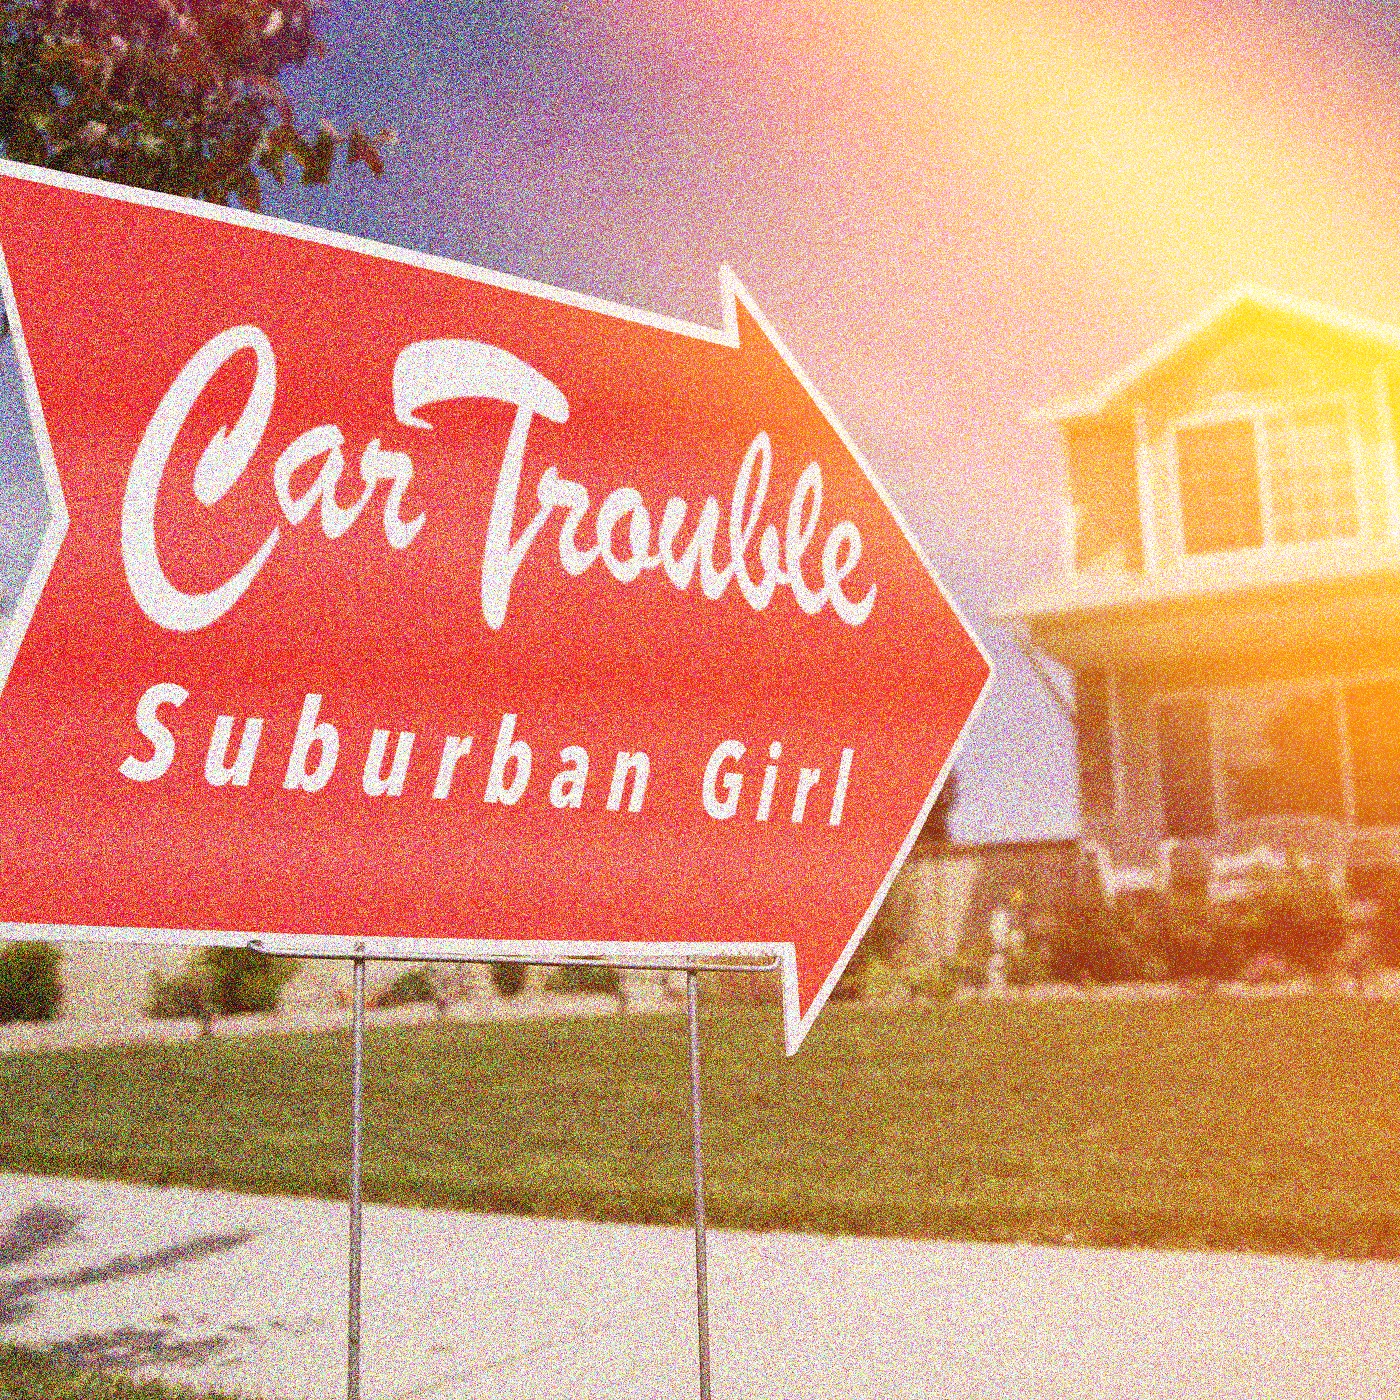 Cover art for the song 'Suburban Girl' by Car Trouble.